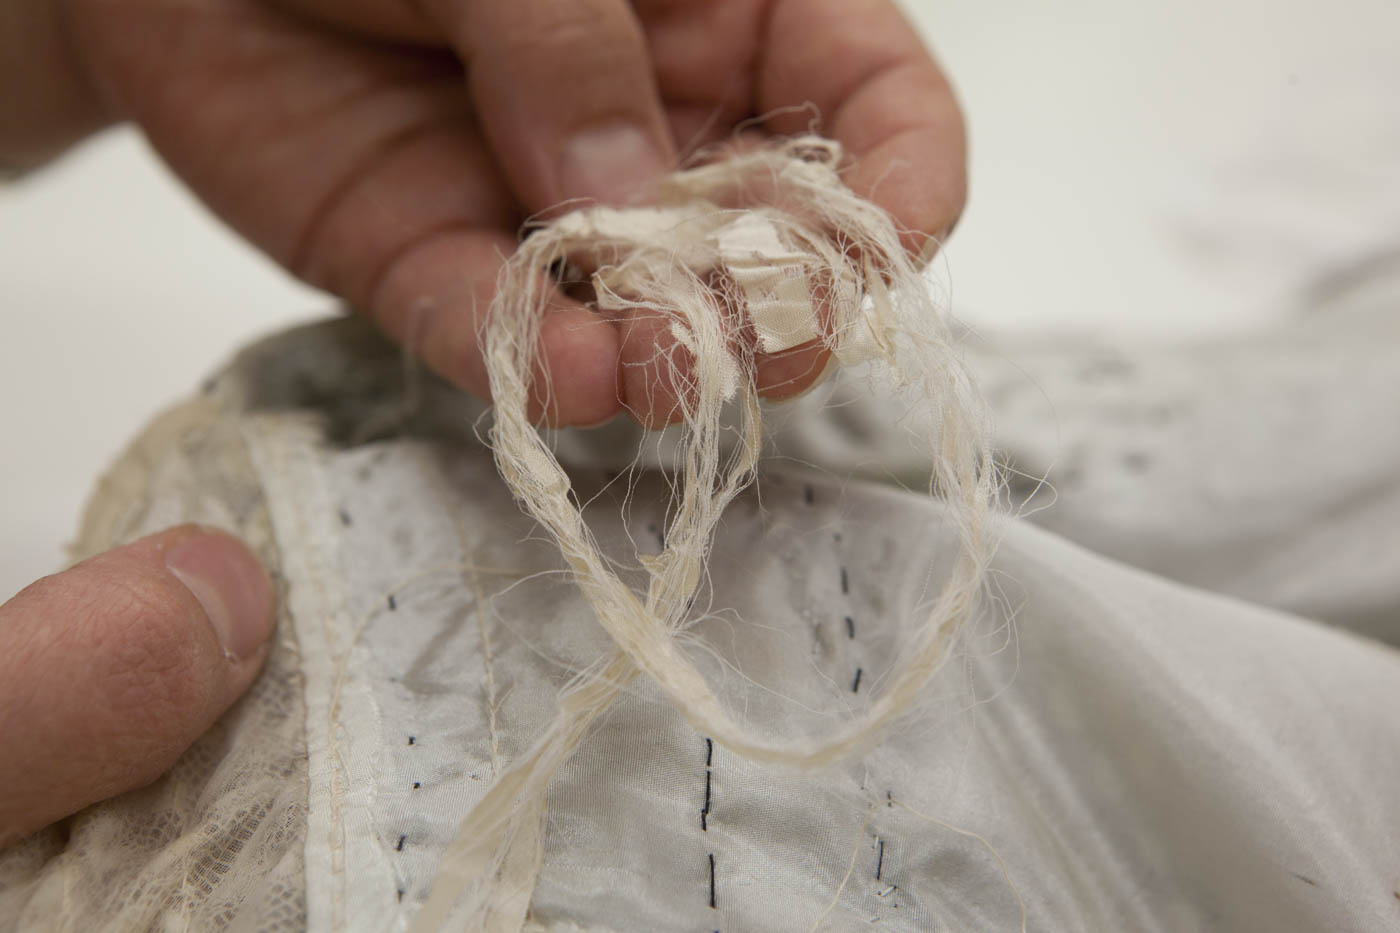 Conservator inspecting damage on the dress. - click to view larger image